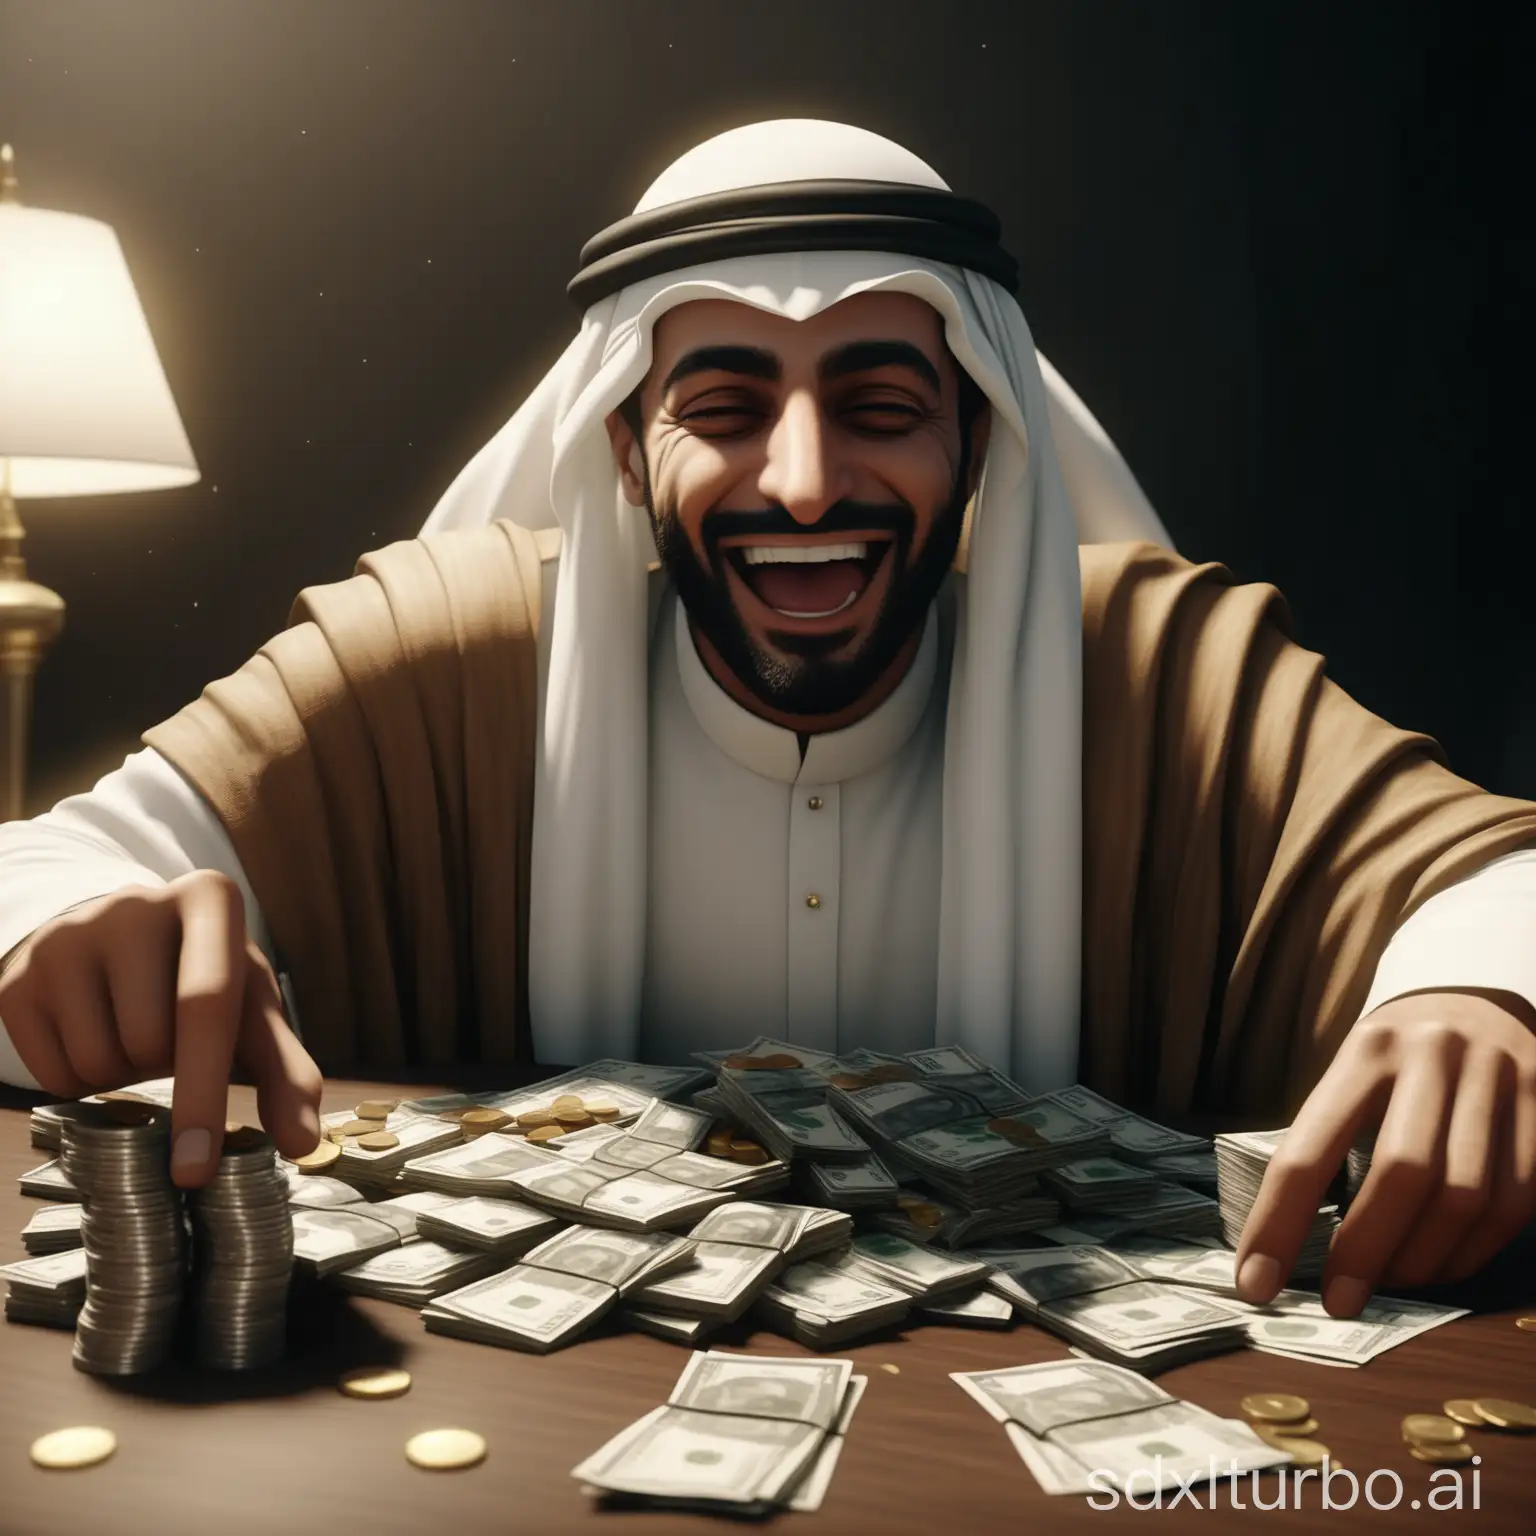 Arab-Wealthy-Man-Counting-Money-with-Greedy-Robber-Lurking